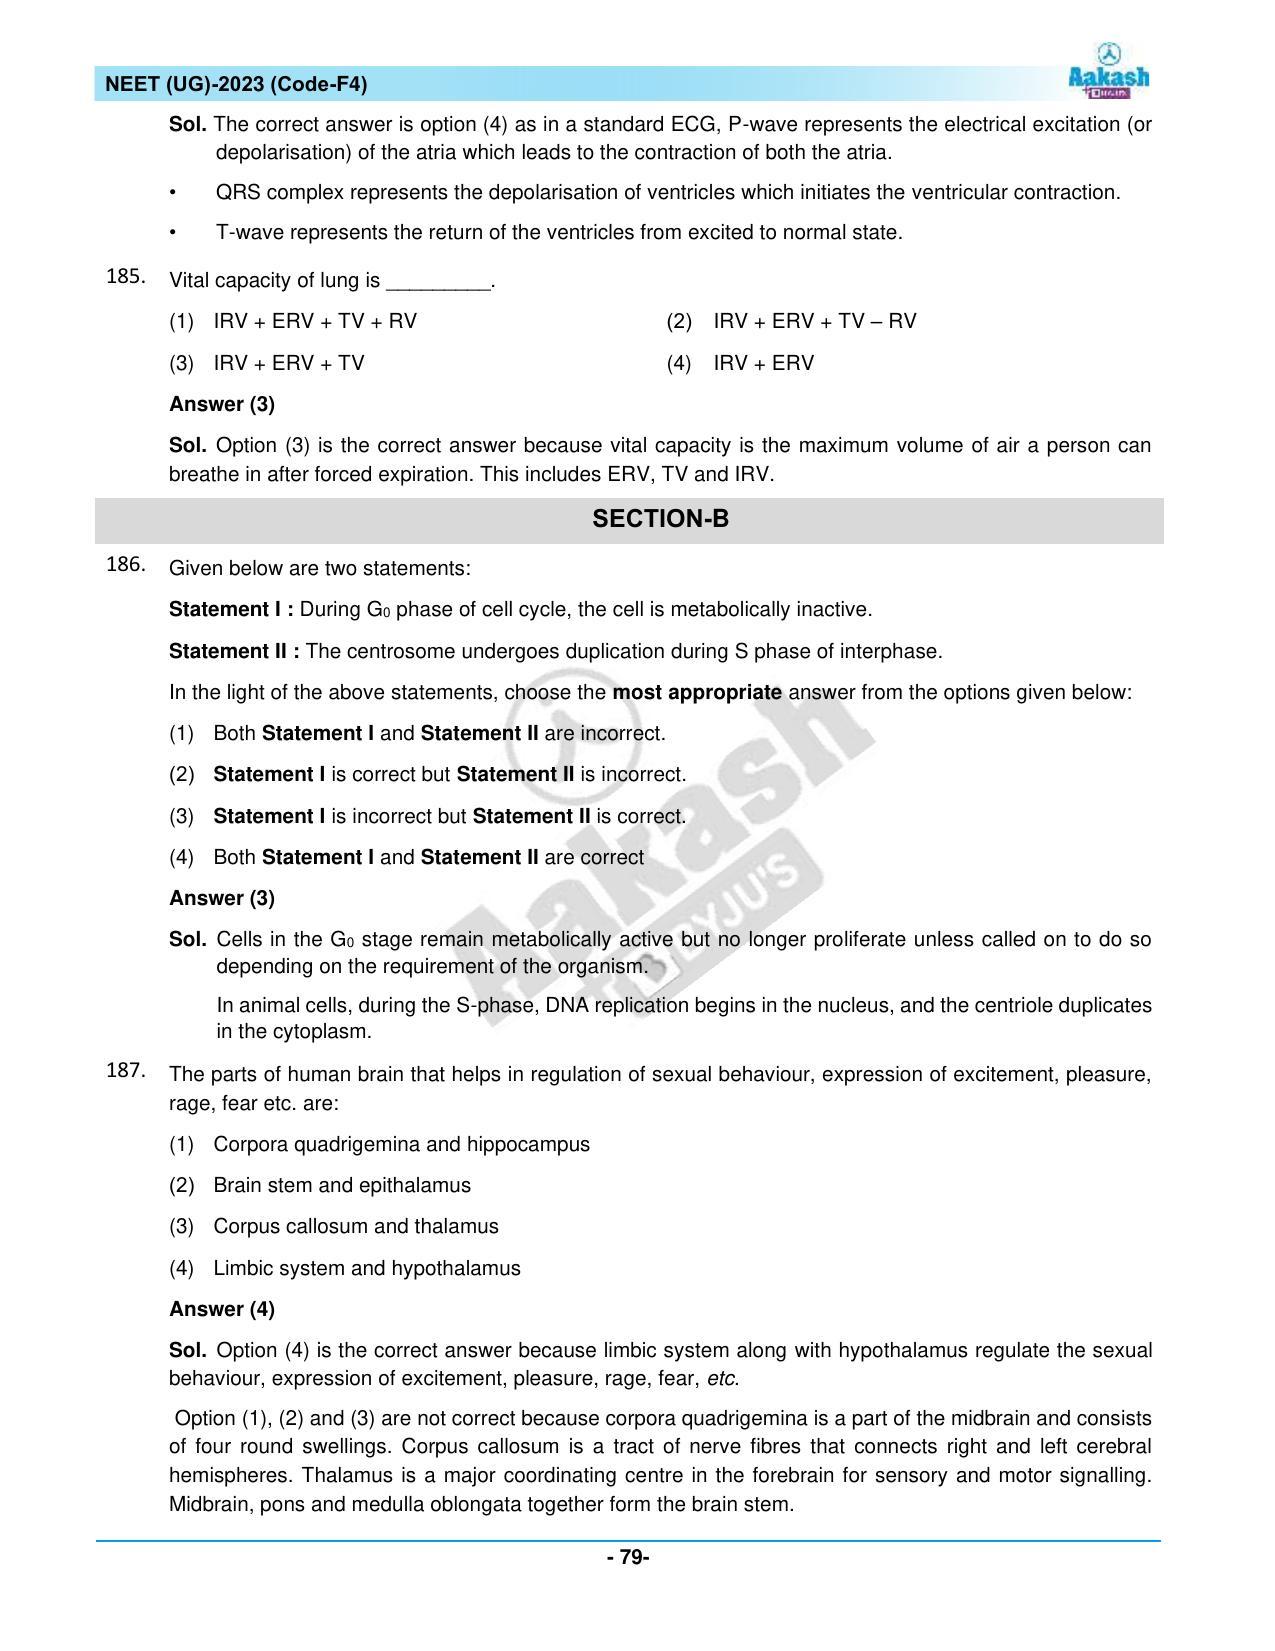 NEET 2023 Question Paper F4 - Page 79